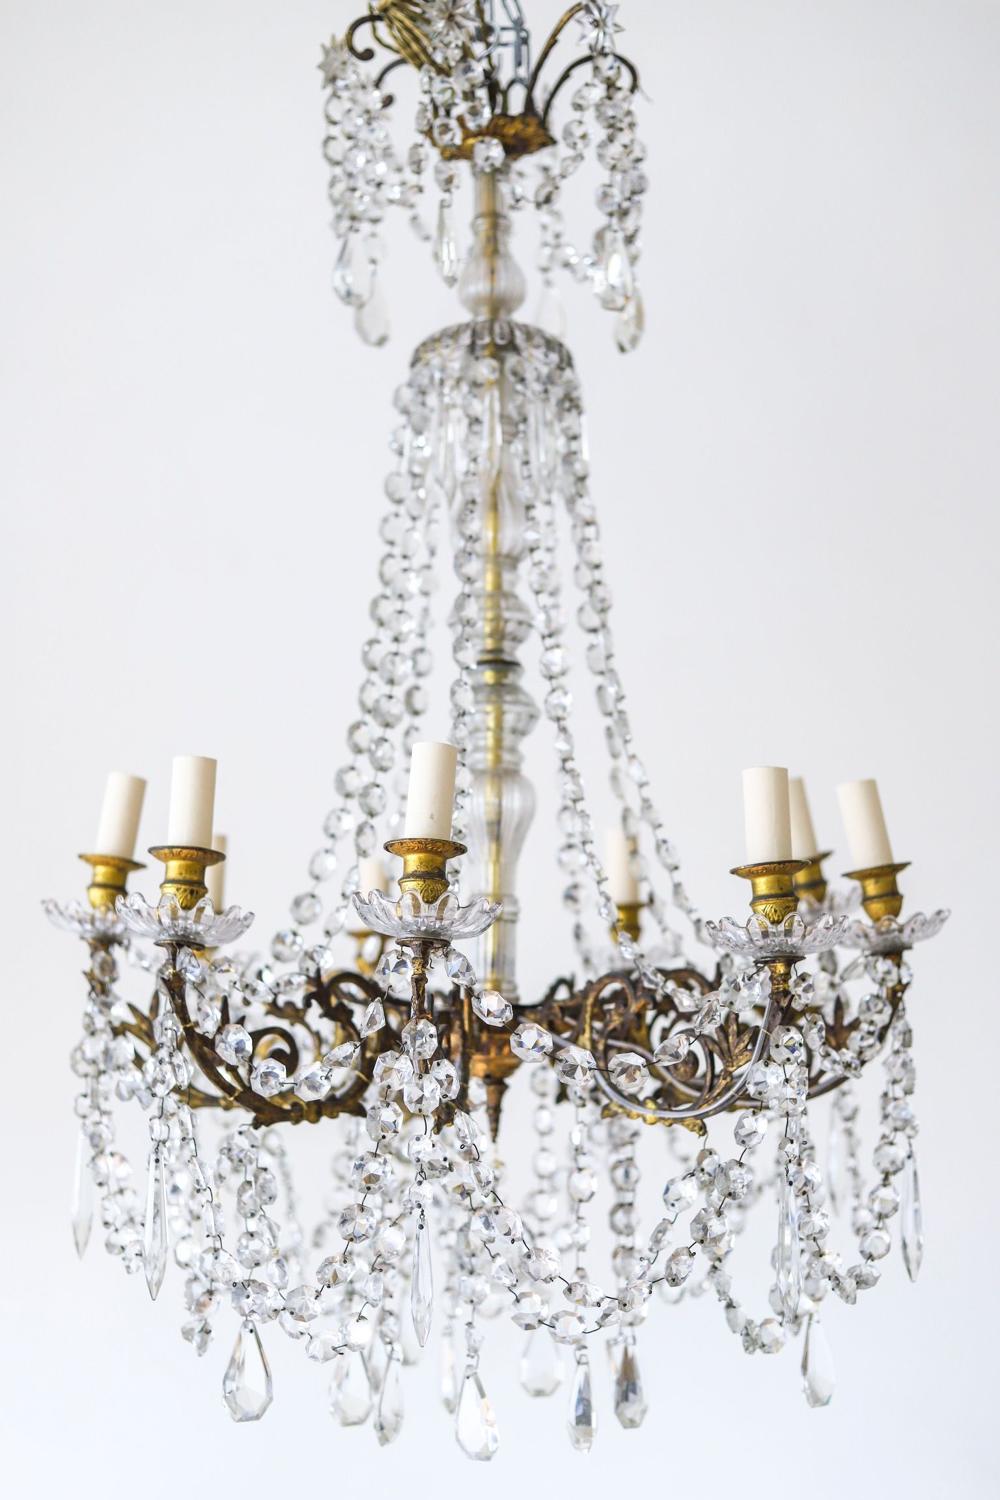 Large French antique crystal 8 branch chandelier c1870